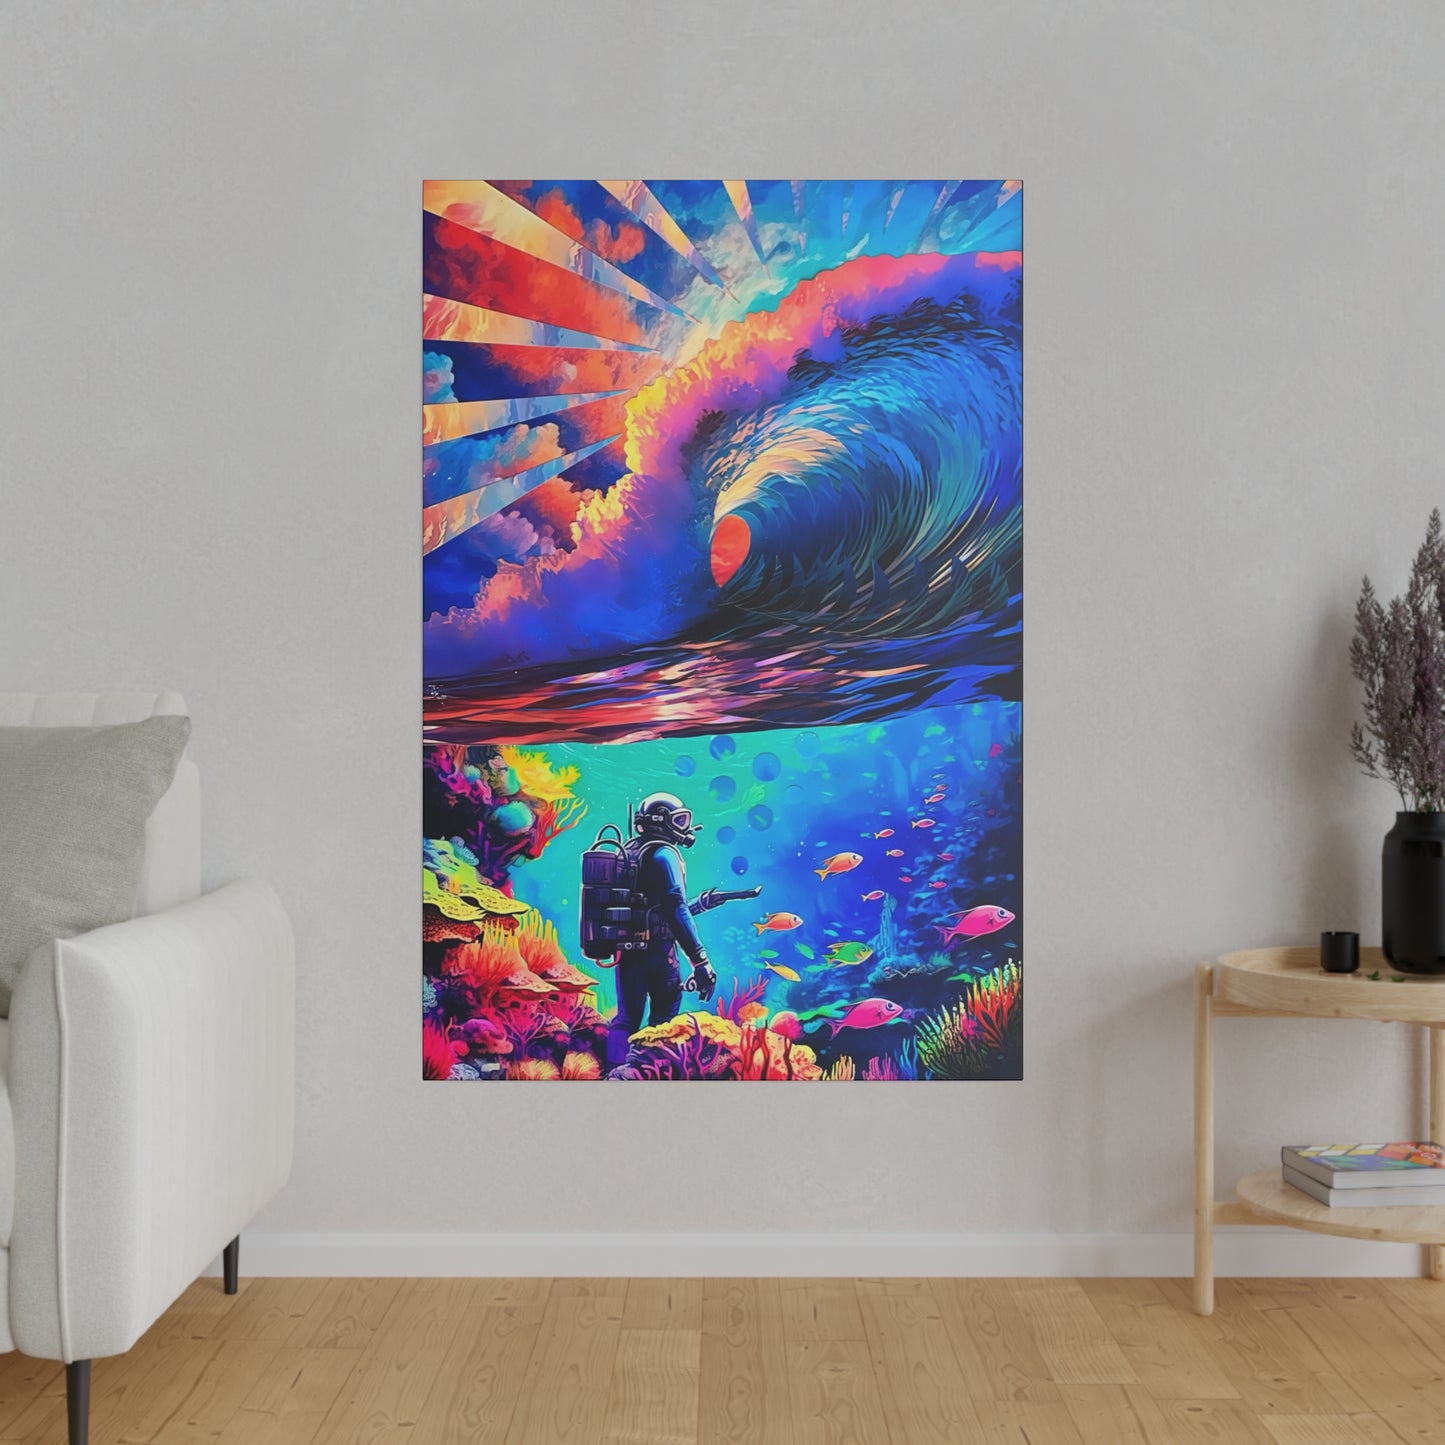 Lost In The Ocean - Canvas